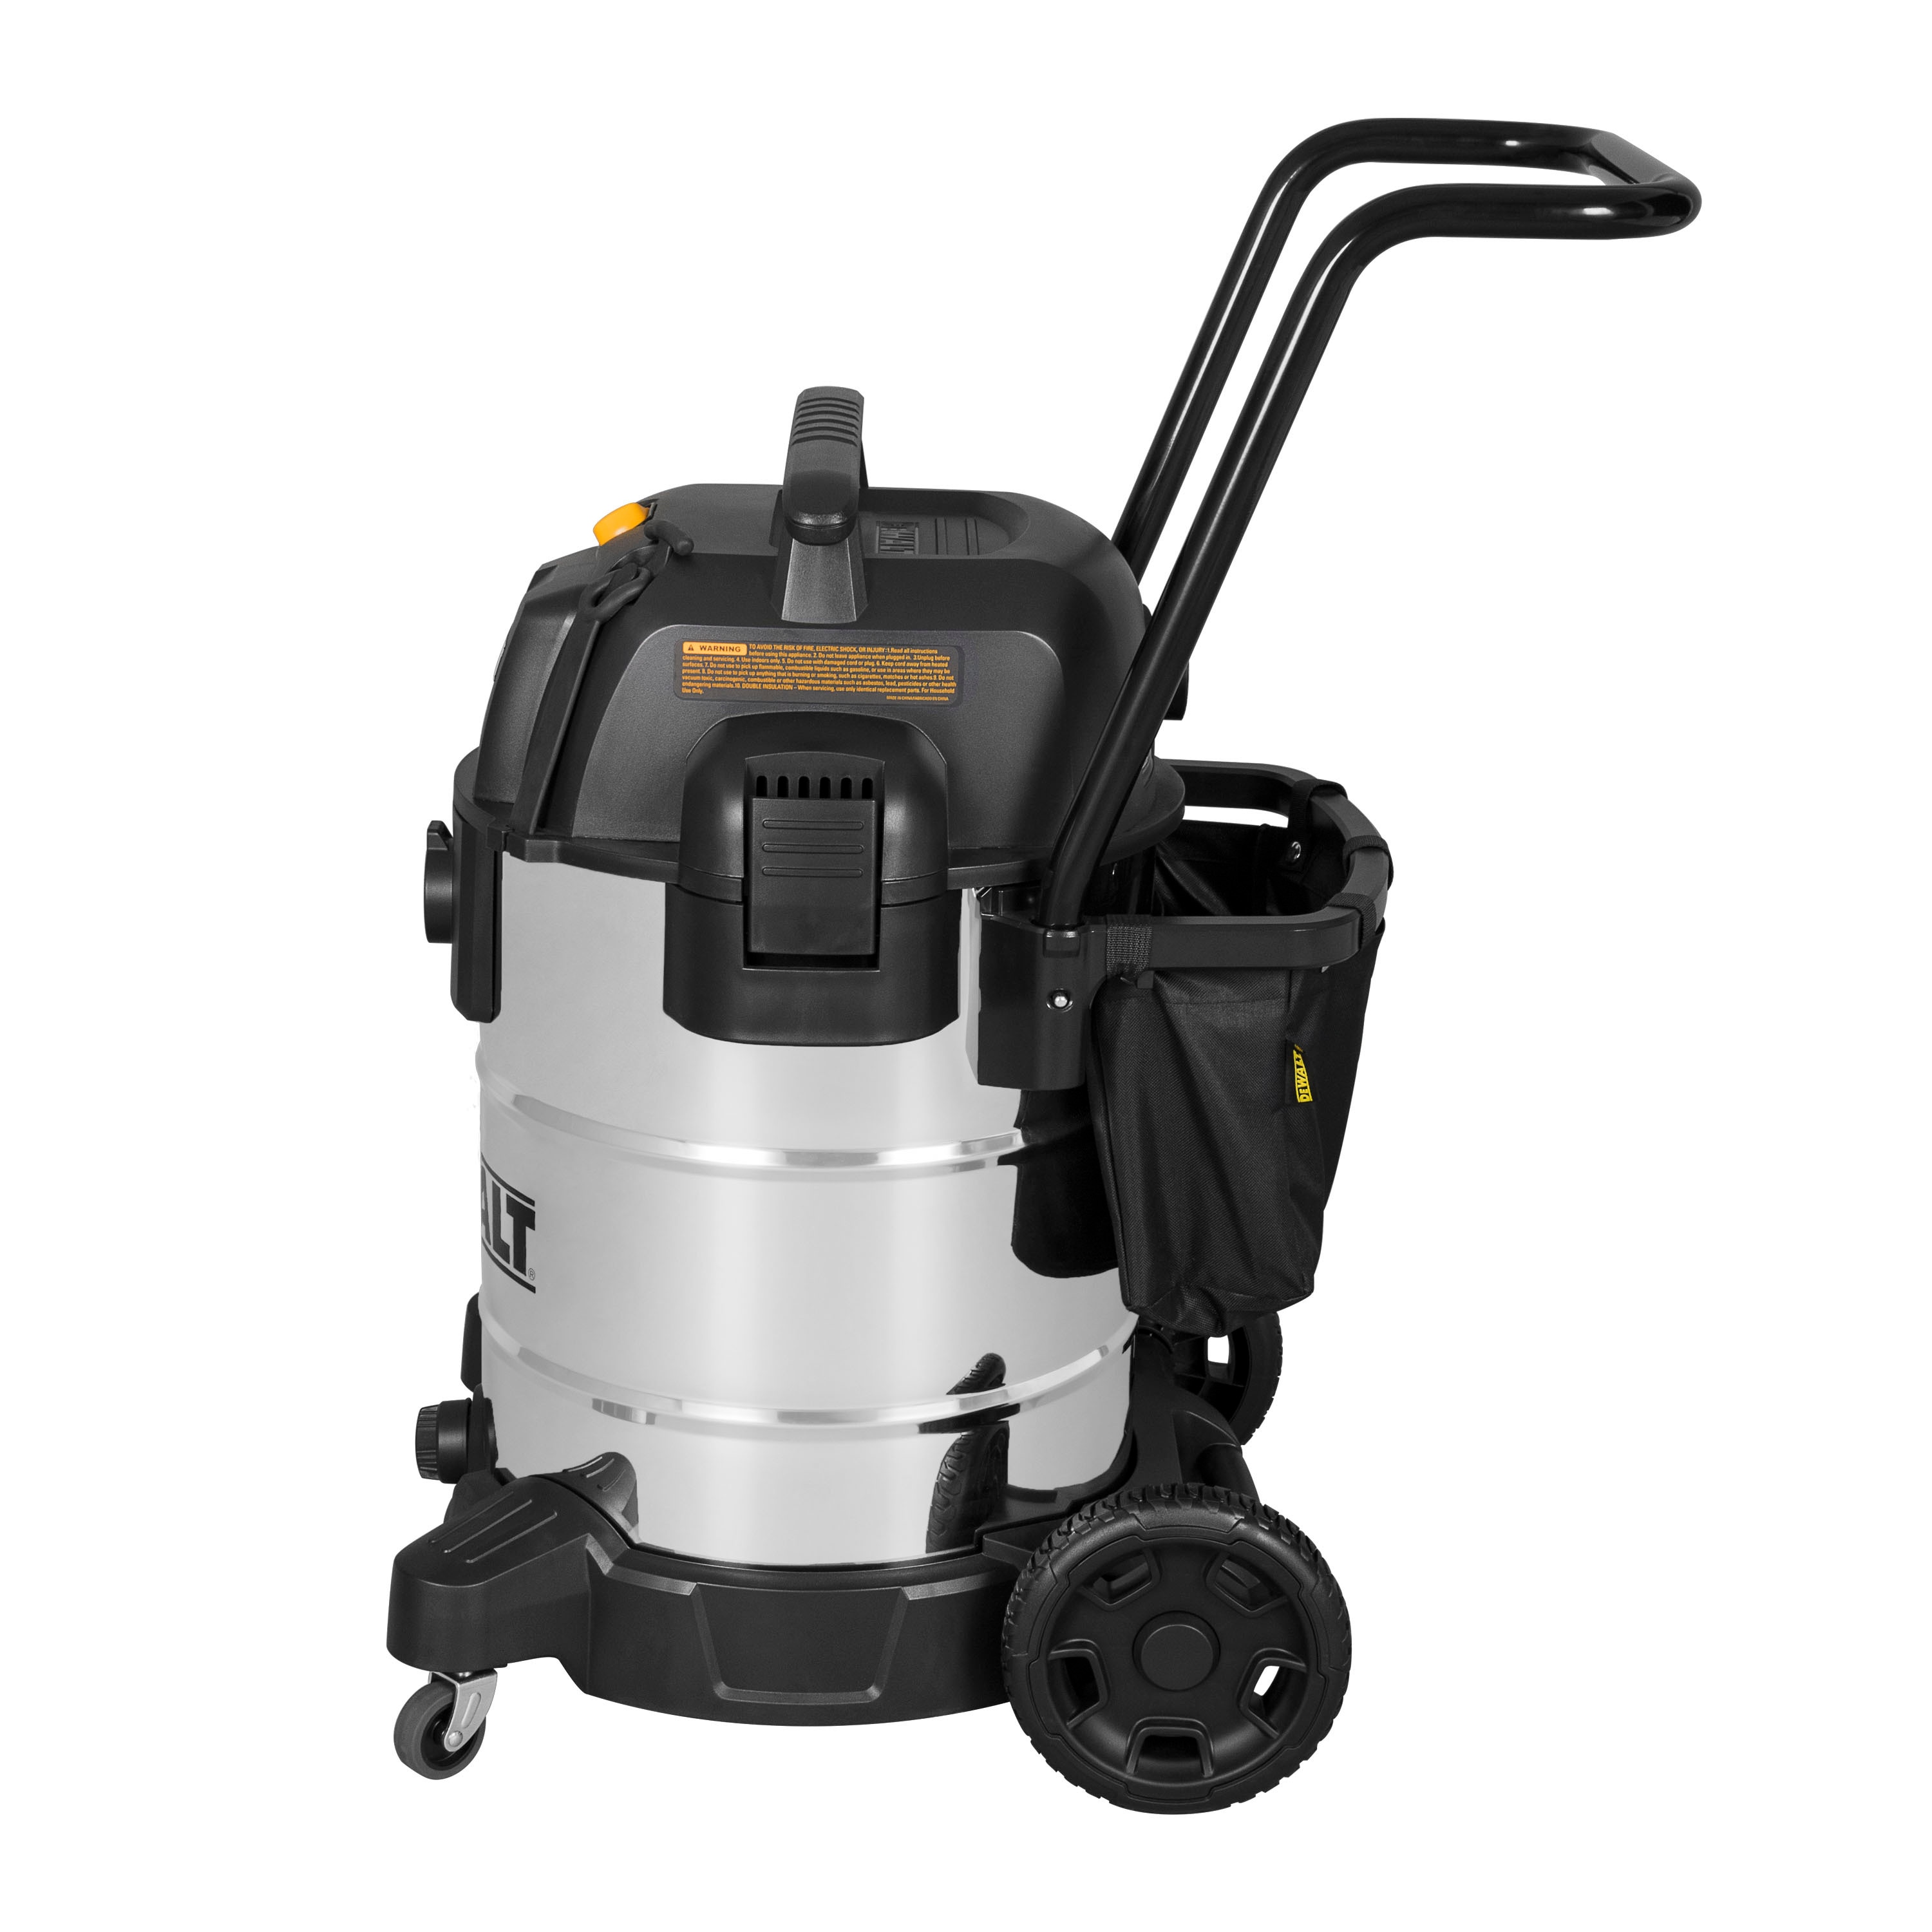 16 Gallon, 6.5 HP Wet/Dry Vacuum with Extra Accessories